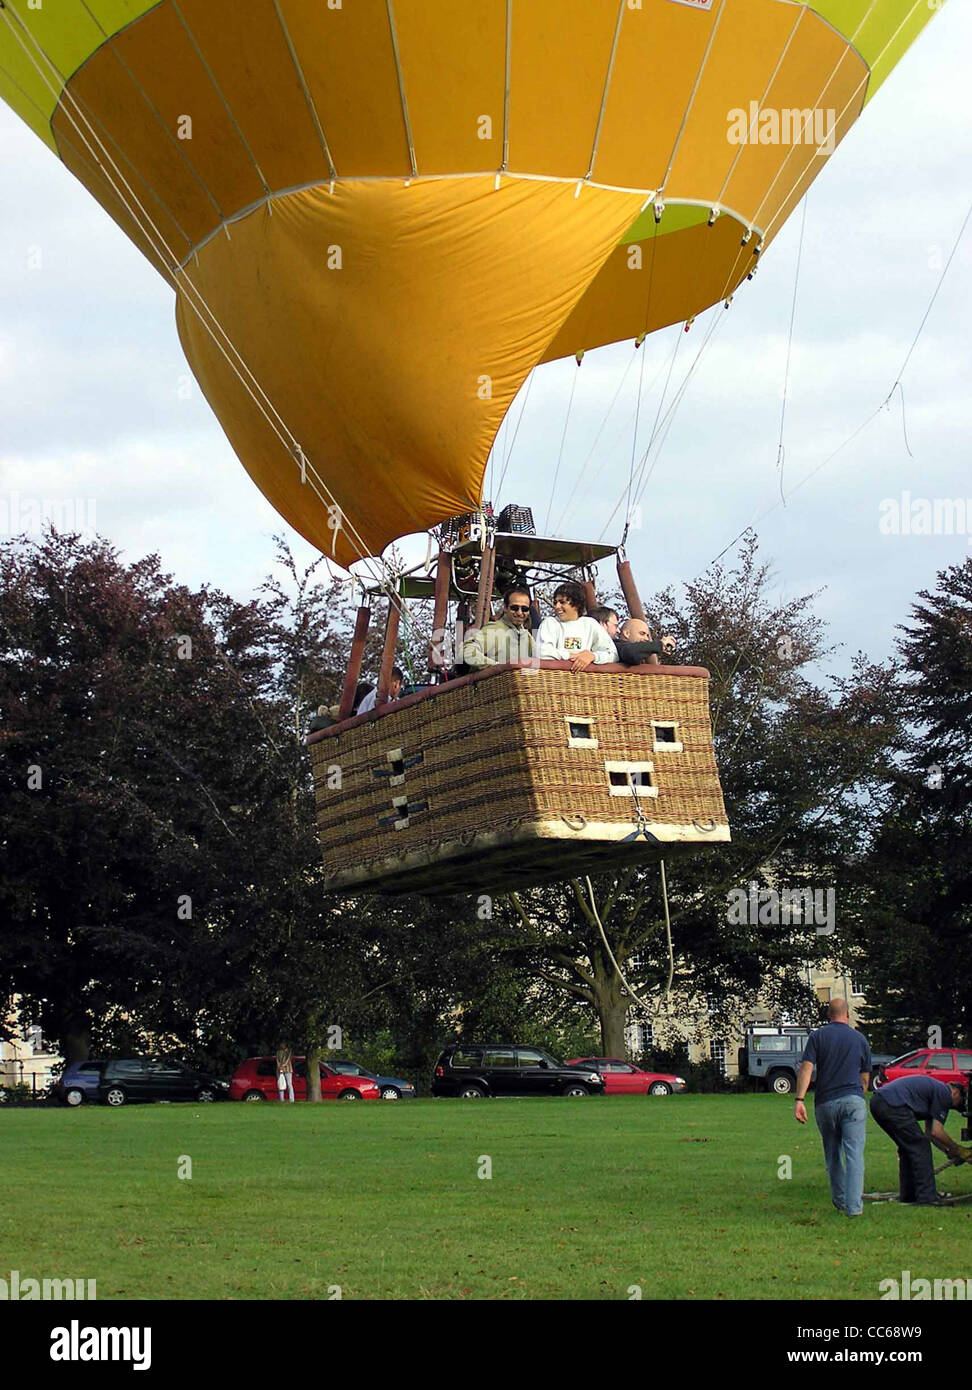 A hot air balloon lifts off in the evening, from Royal Victoria Park, Bath, England. Stock Photo